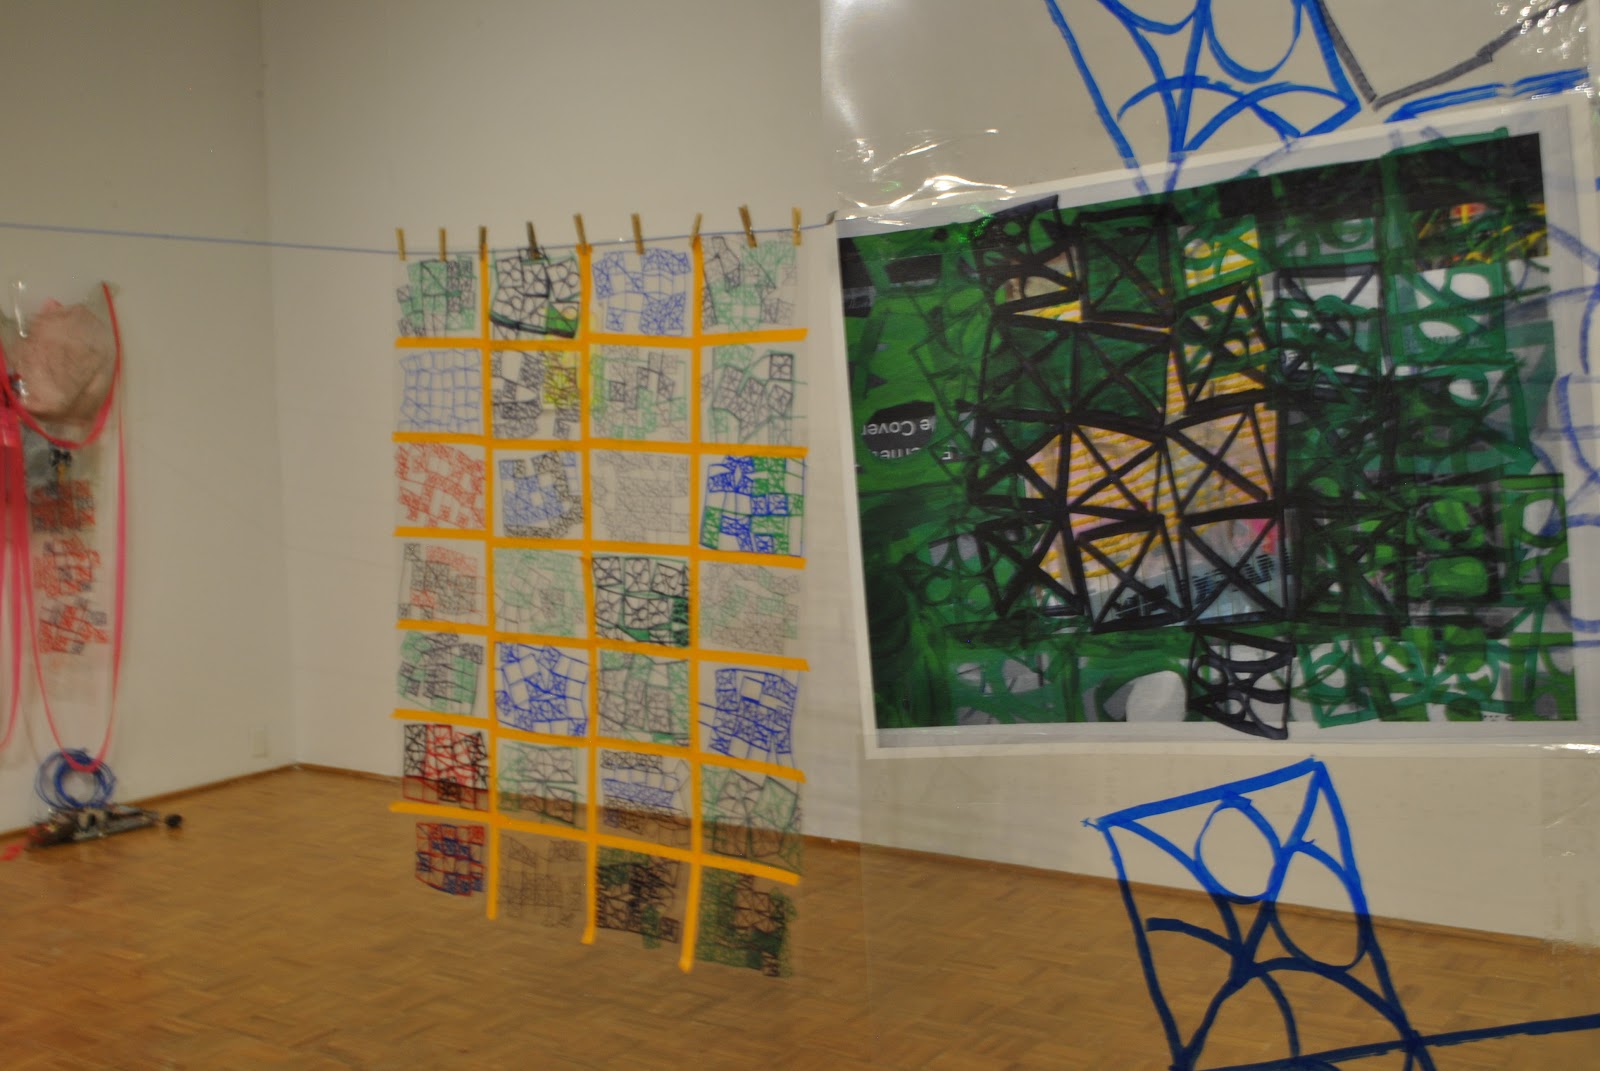 Image: Kelly Clare, enter / the net / here, 2022, Edna Carlsten Gallery. A quilt made from drawings on transparency sheets hangs from a blue rope. Drawings depict breeze block patterns with circles and squares in various formations in blue, green, red, and black marker. A grid pattern is formed by yellow tape which holds the quilt together. Image courtesy of the artist.